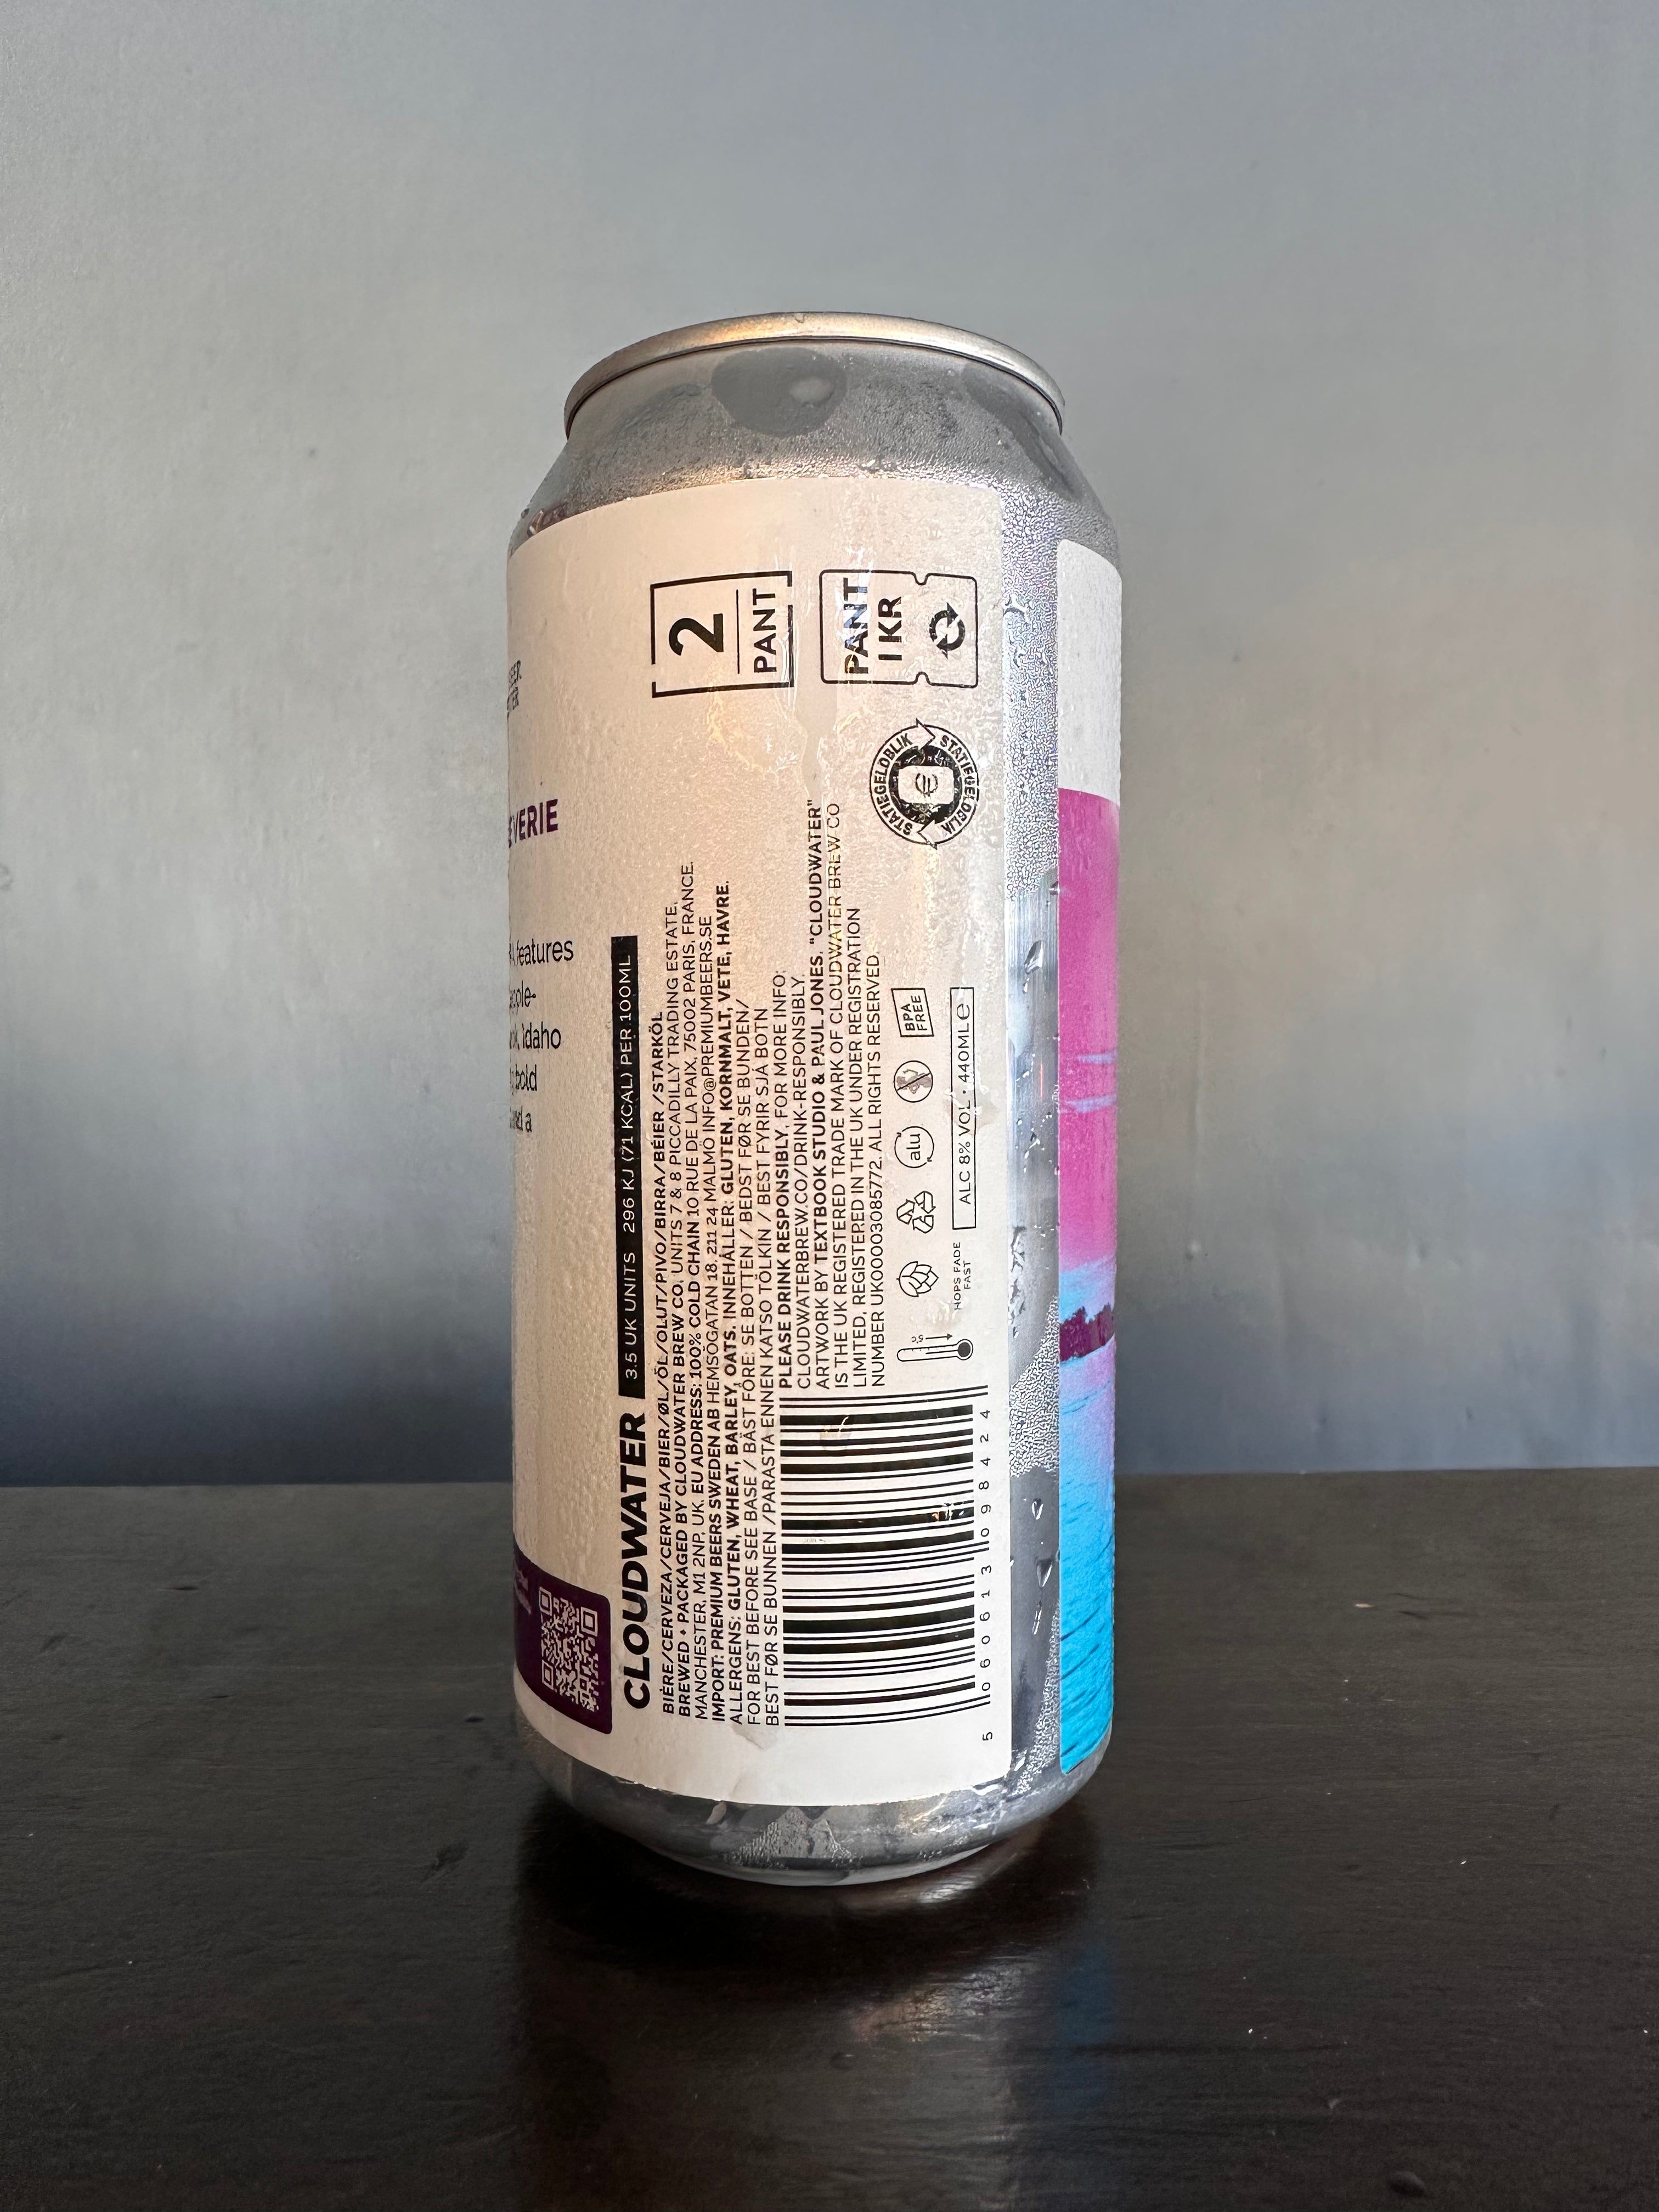 Cloudwater Caught up in Reverie DIPA 8%